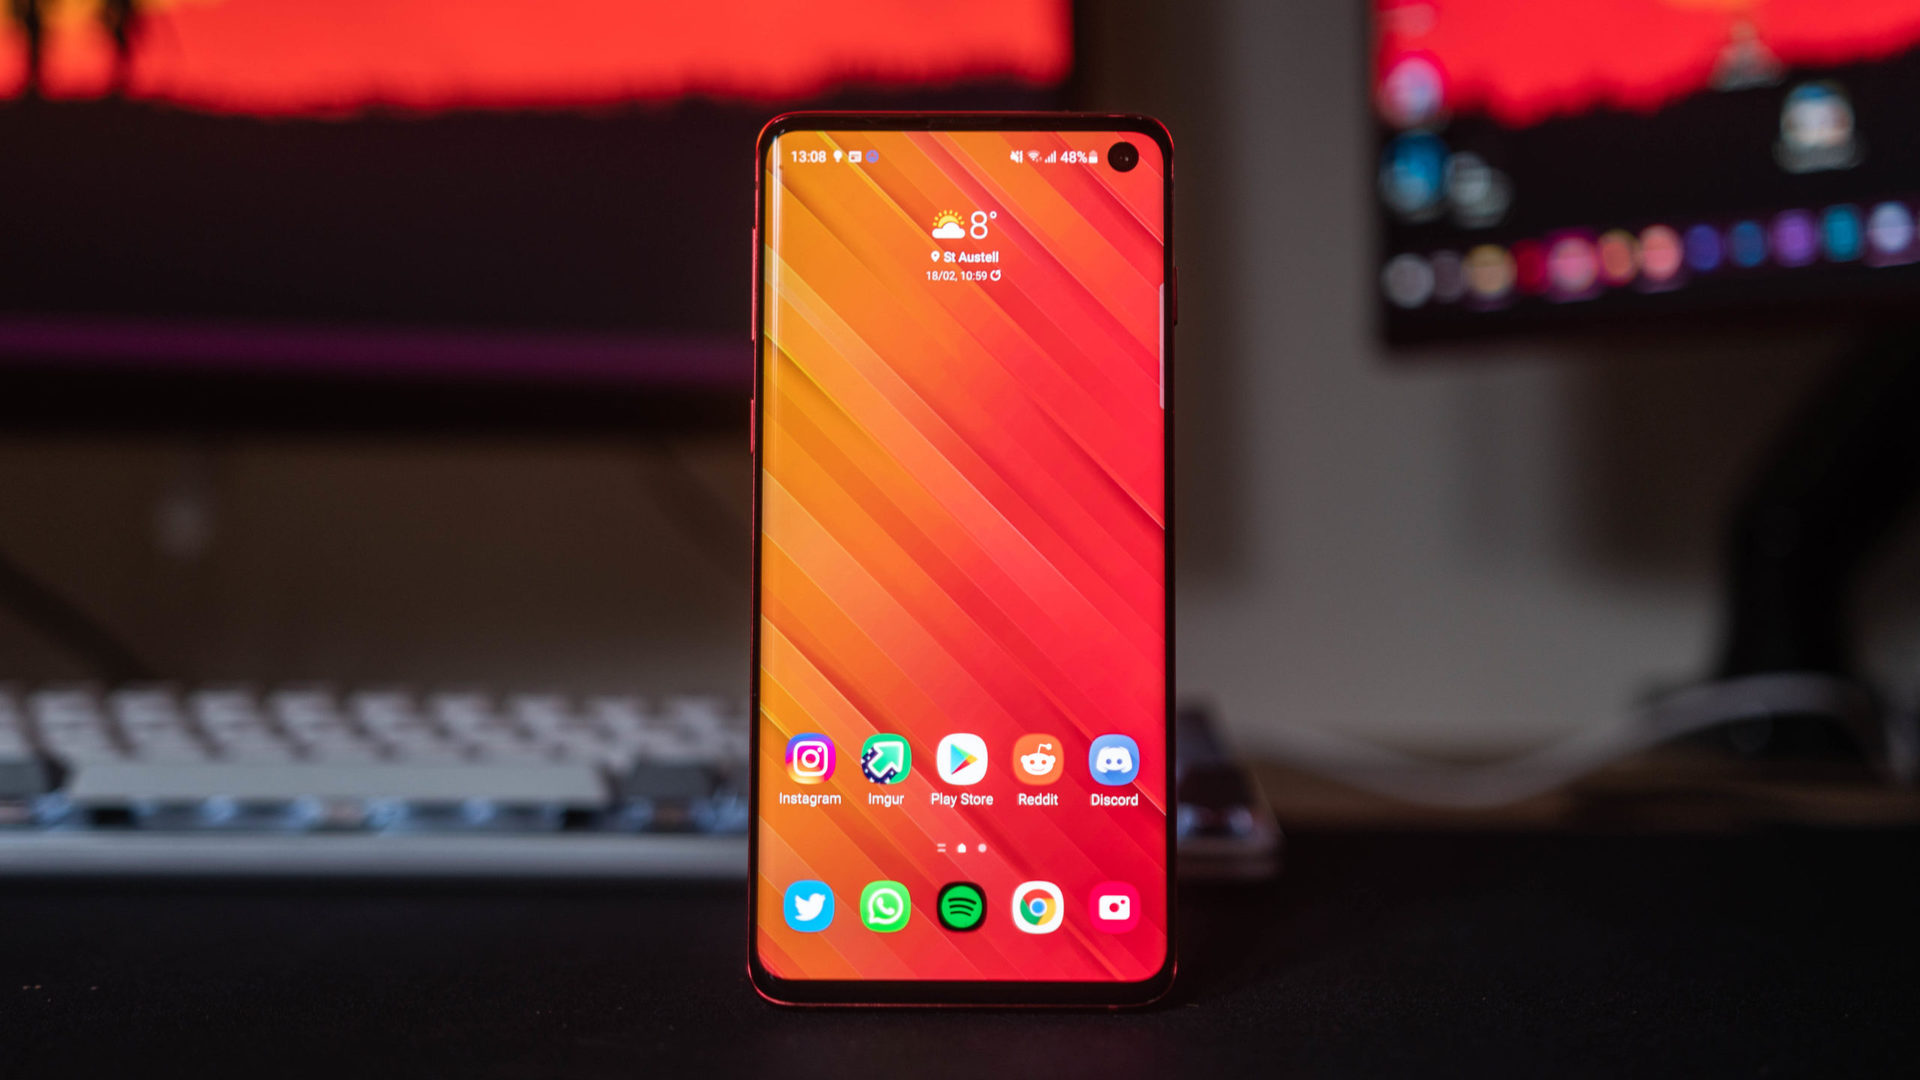 How to take a screenshot on the Samsung Galaxy S10 phones